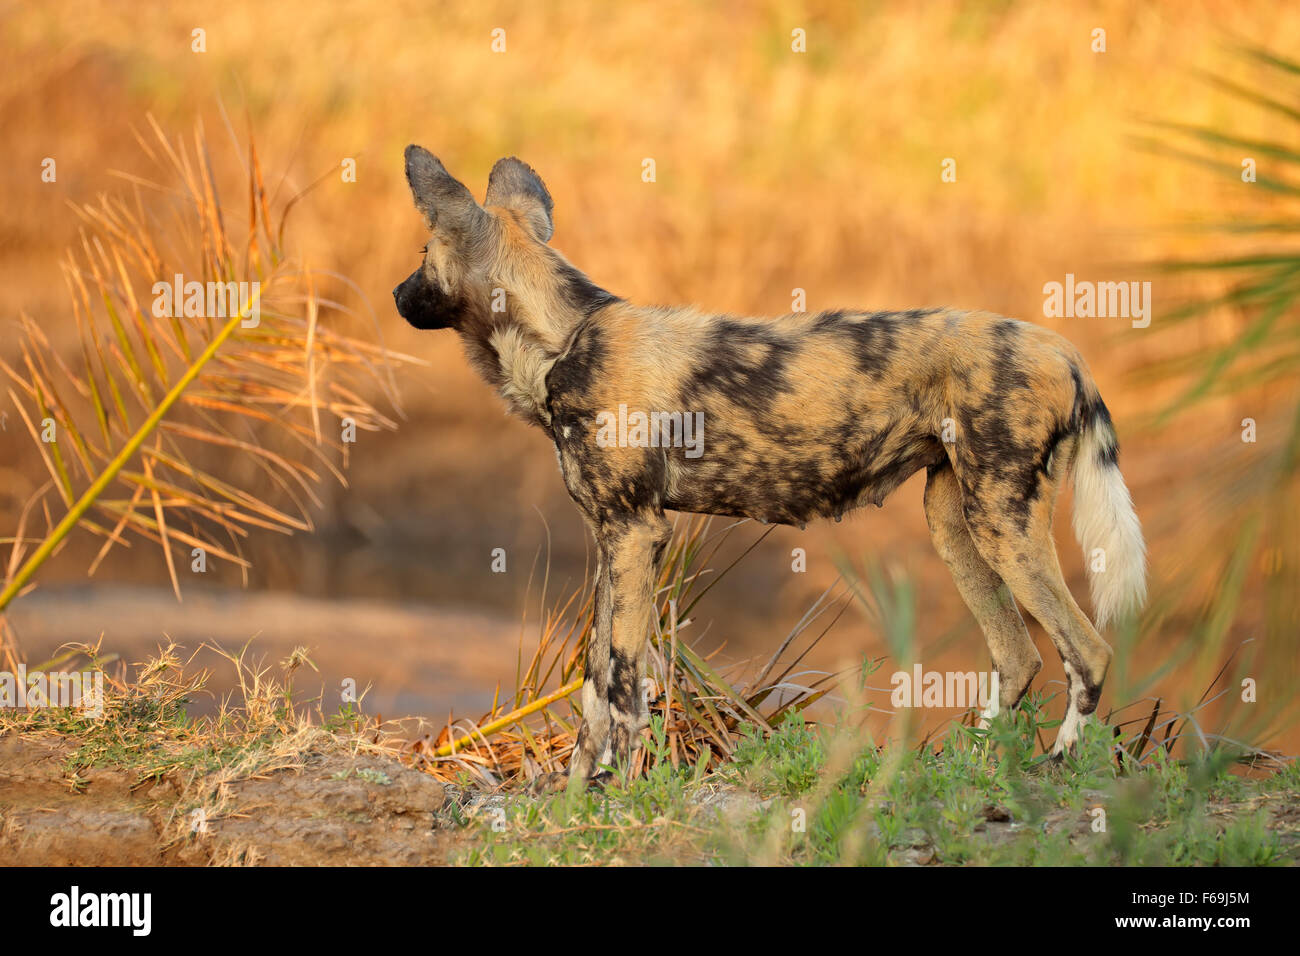 African wild dog or painted hunting dog (Lycaon pictus), Sabie-Sand nature reserve, South Africa Stock Photo